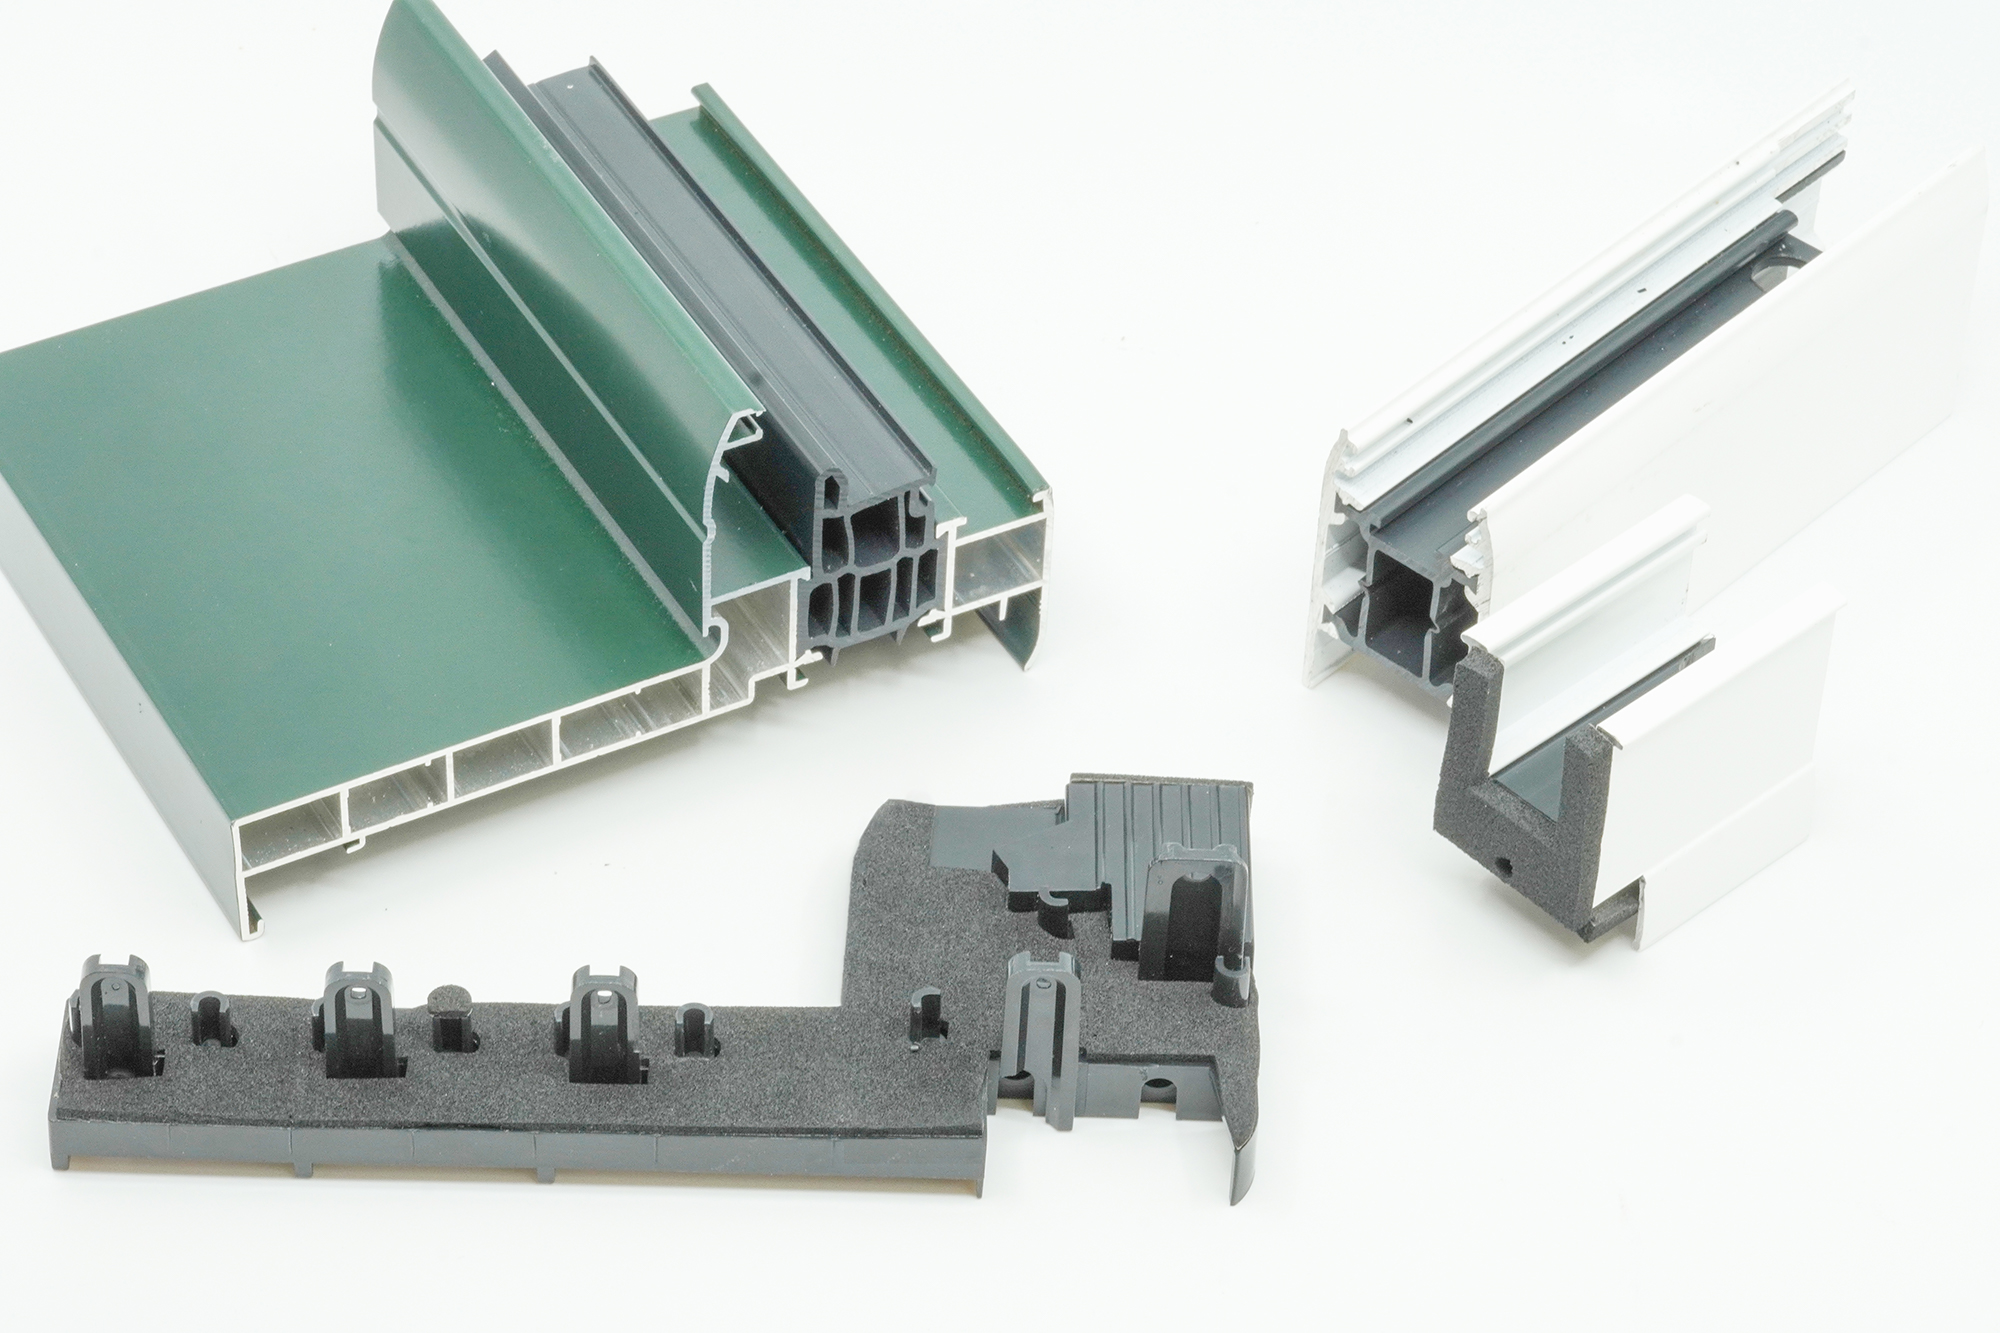 OUR SOLUTIONS FOR SEALING OF INDUSTRIAL JOINERY